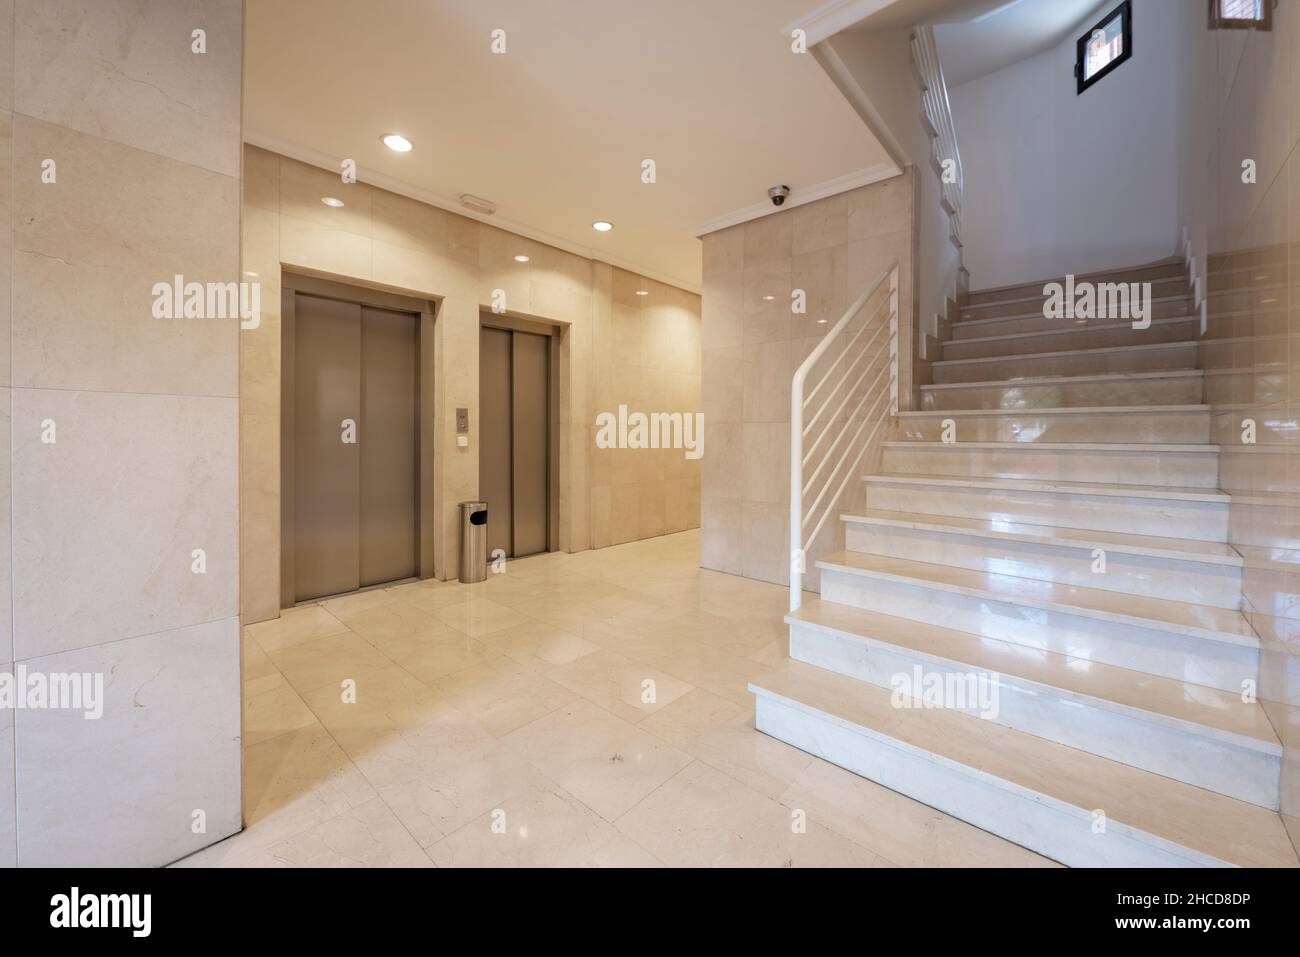 Entrance portal to a building with cream marble floors and walls, stairs and metal elevators Stock Photo